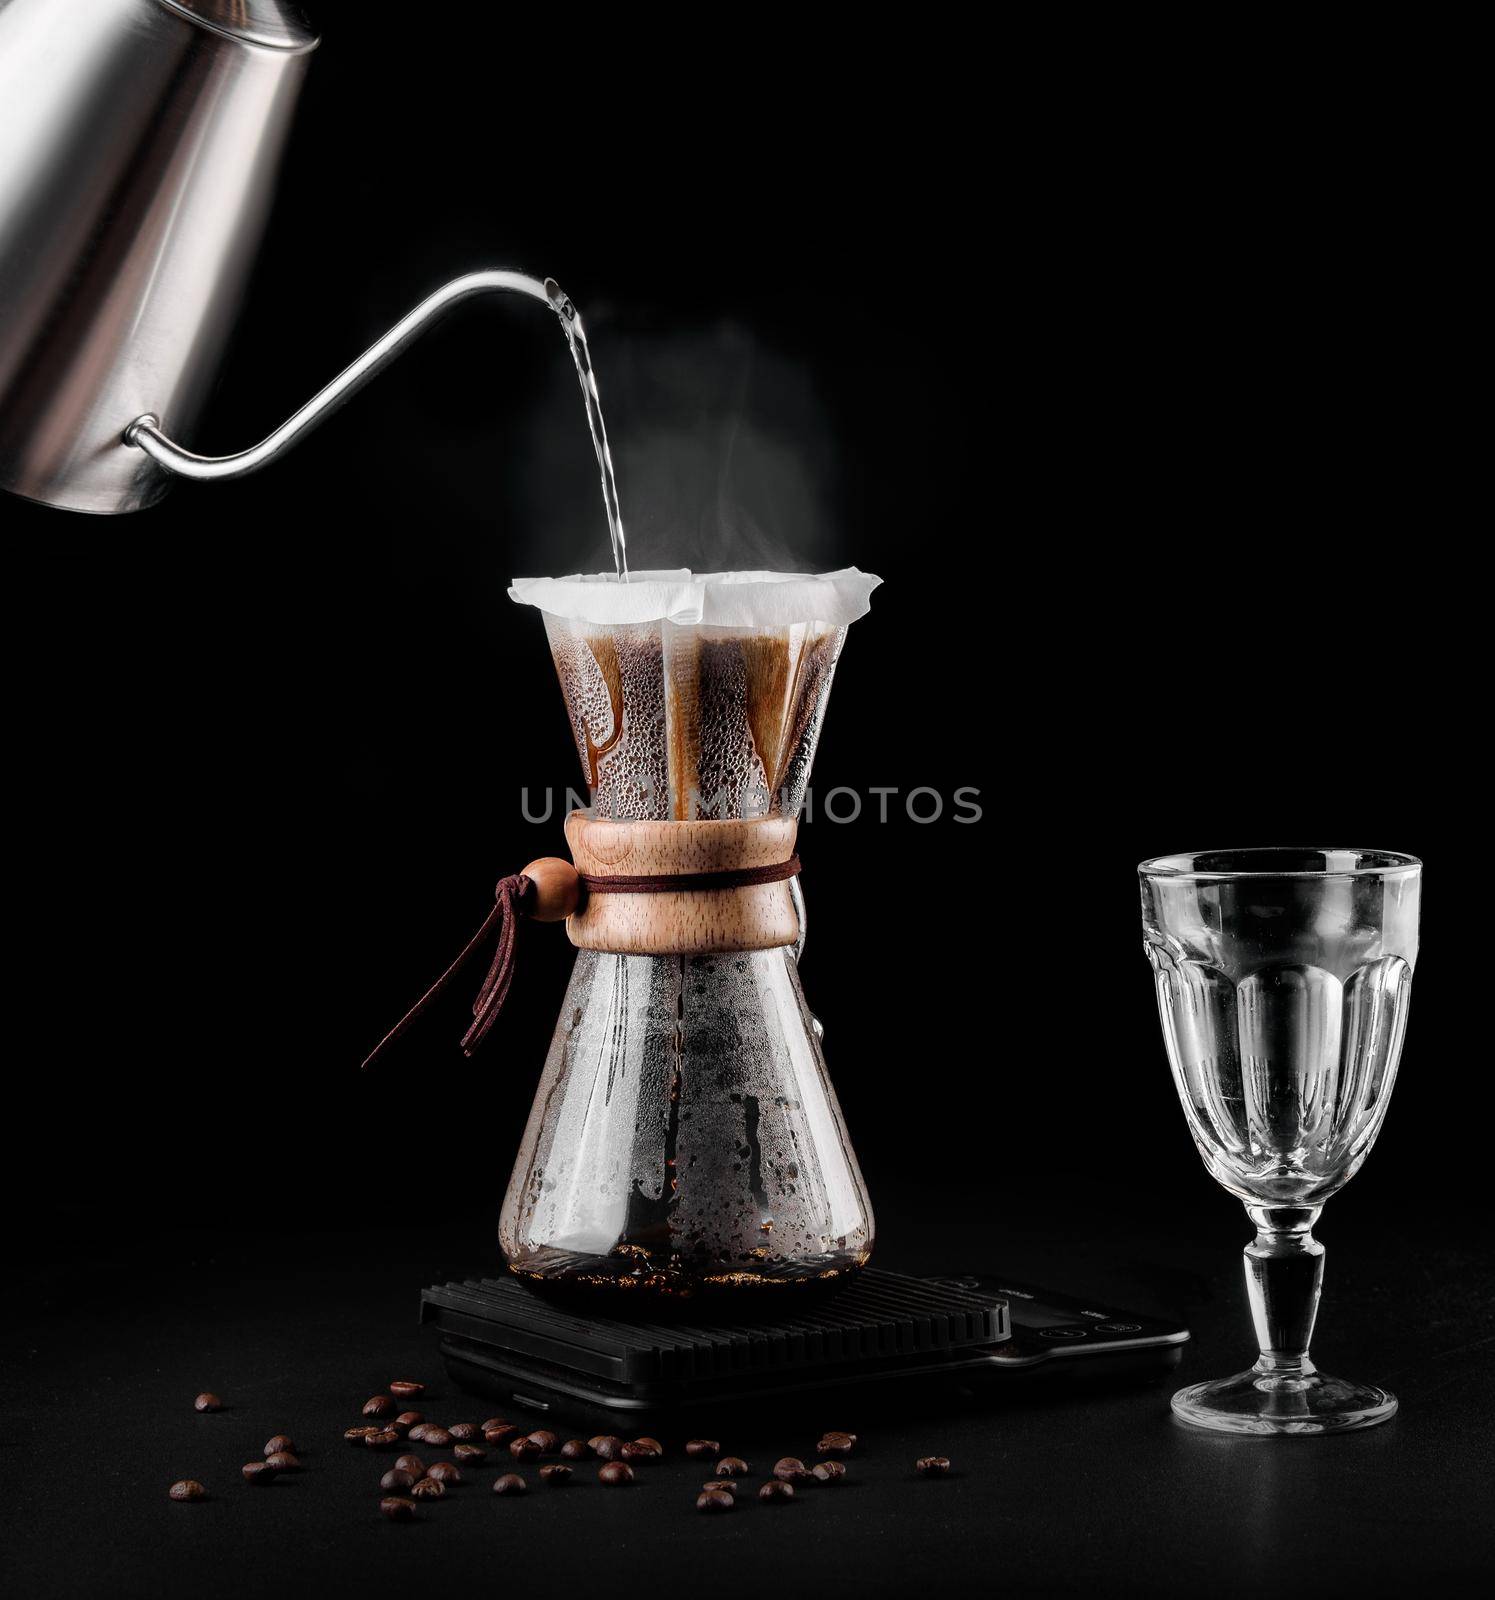 Chemex coffeemaker is a manual pour-over style glass coffeemaker. Chemex is a device for brewing coffee. Coffee brewing by Rabizo